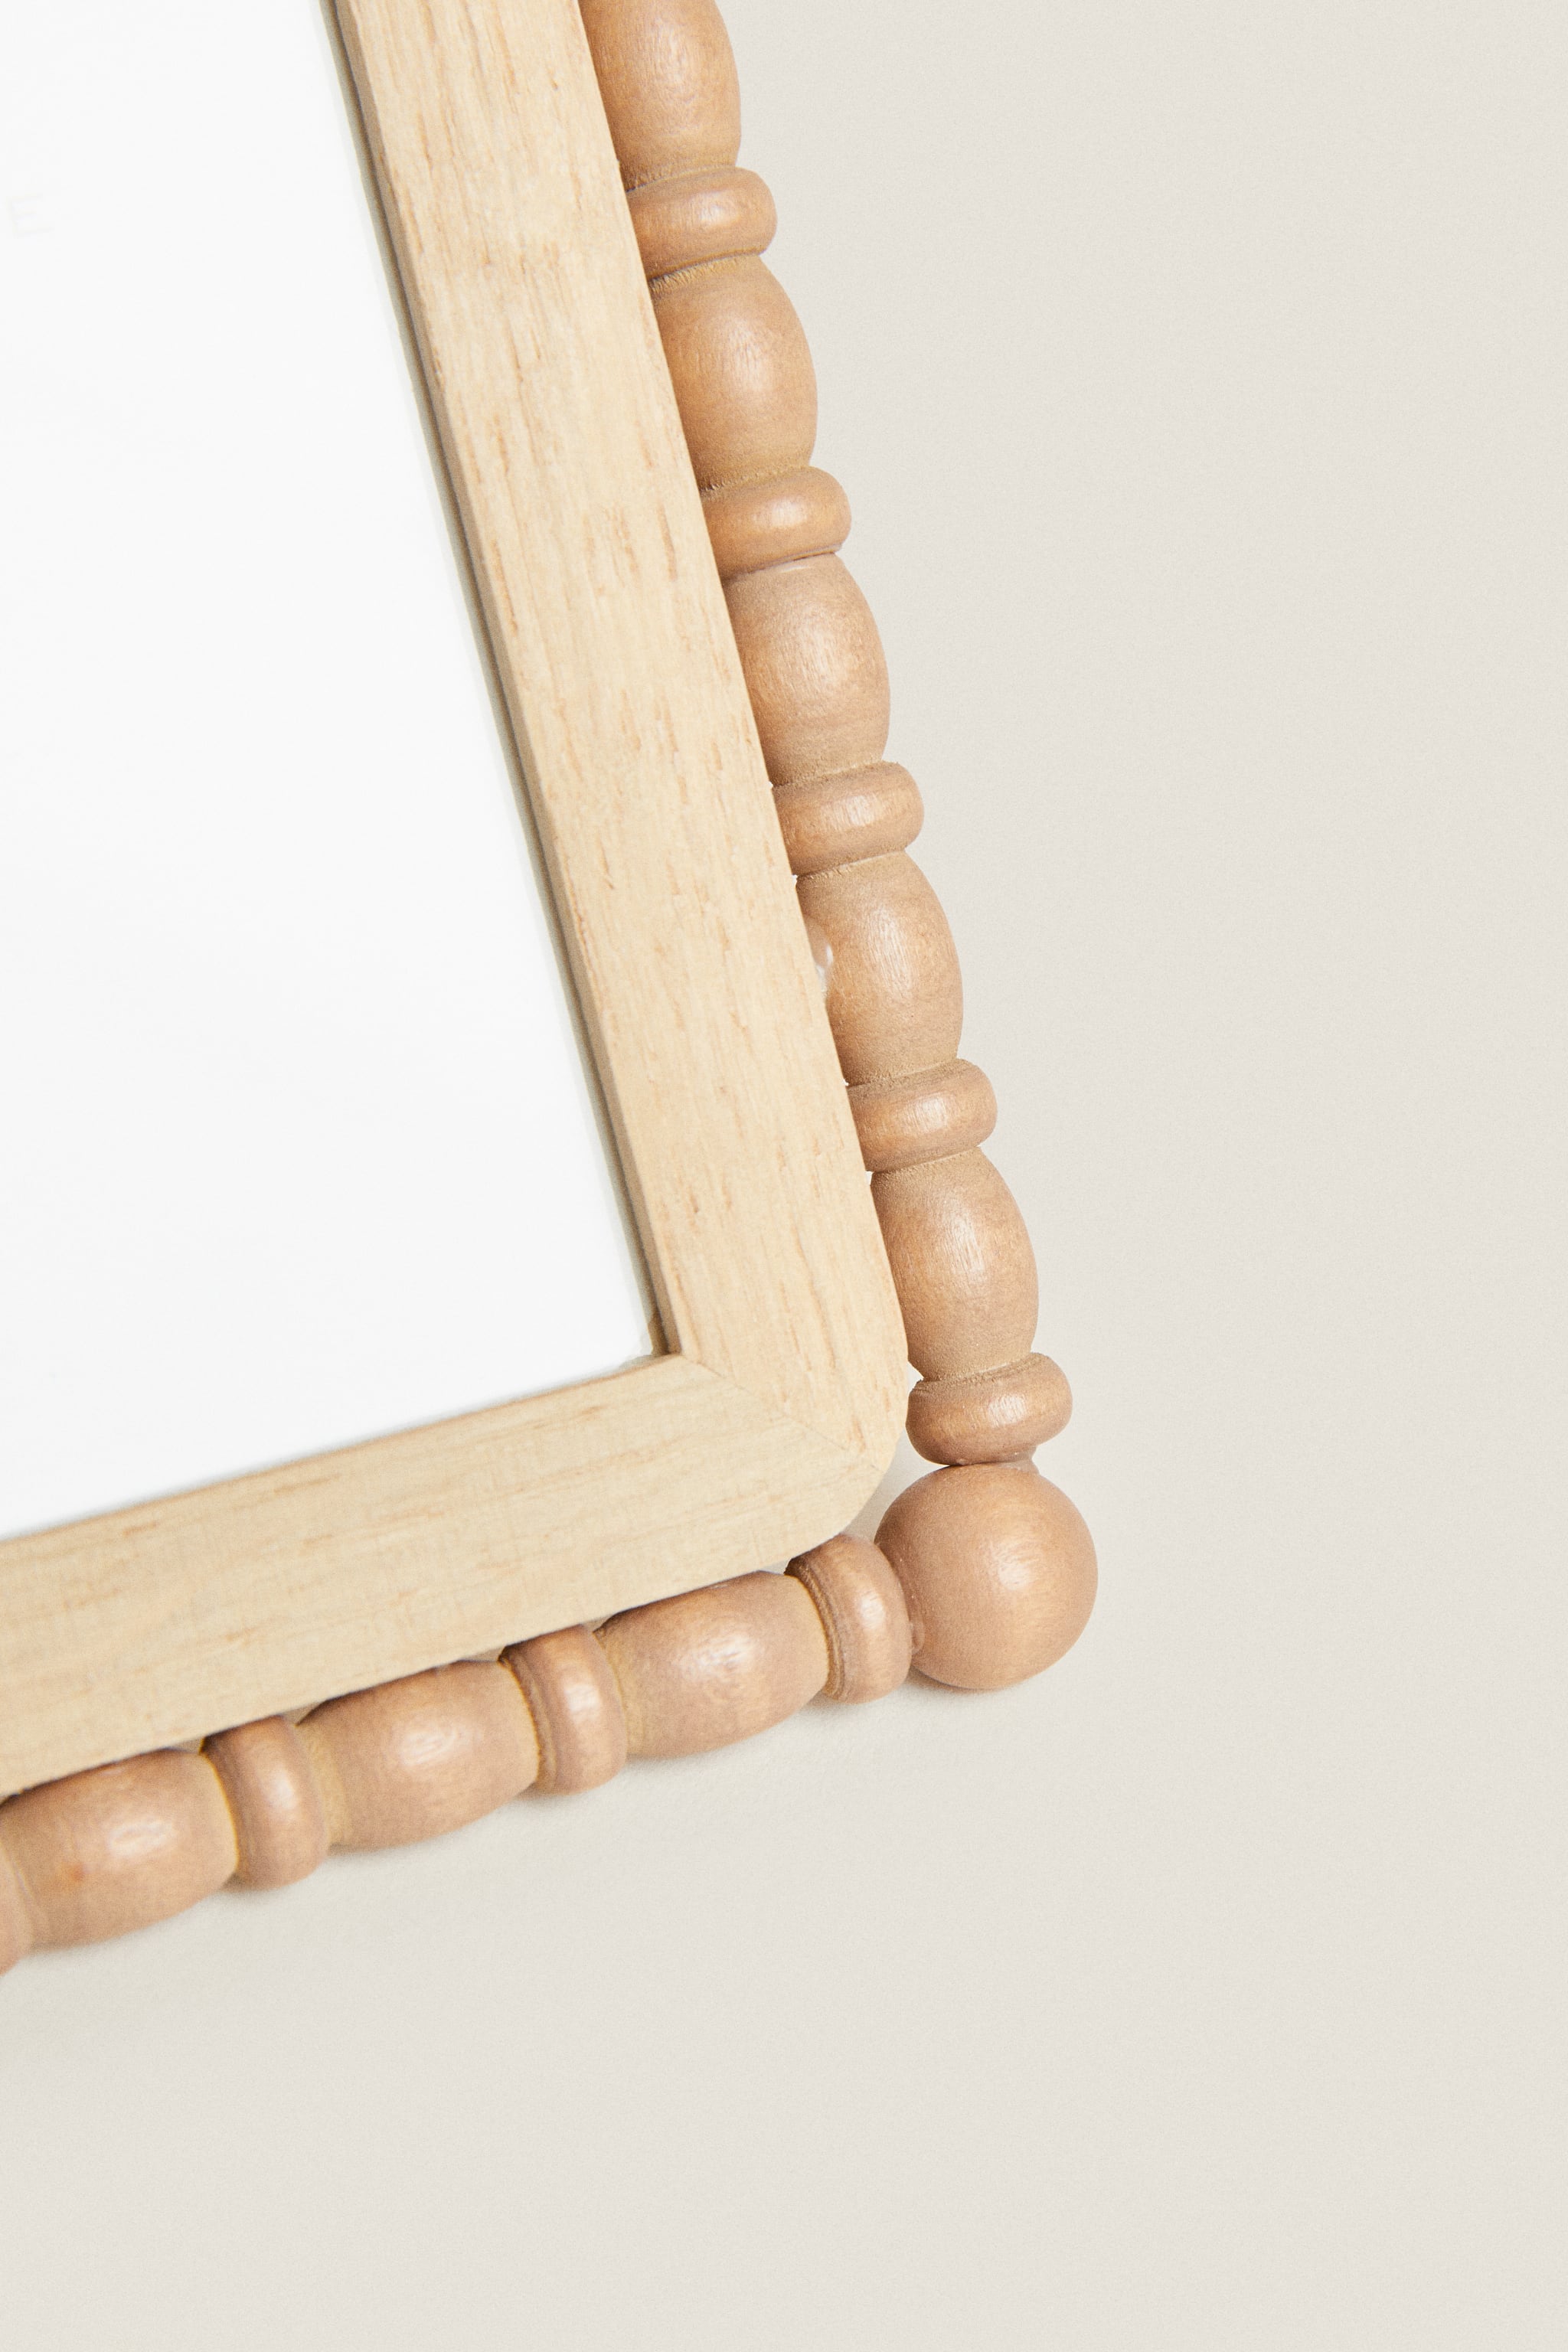 SMALL WOODEN PHOTO FRAME